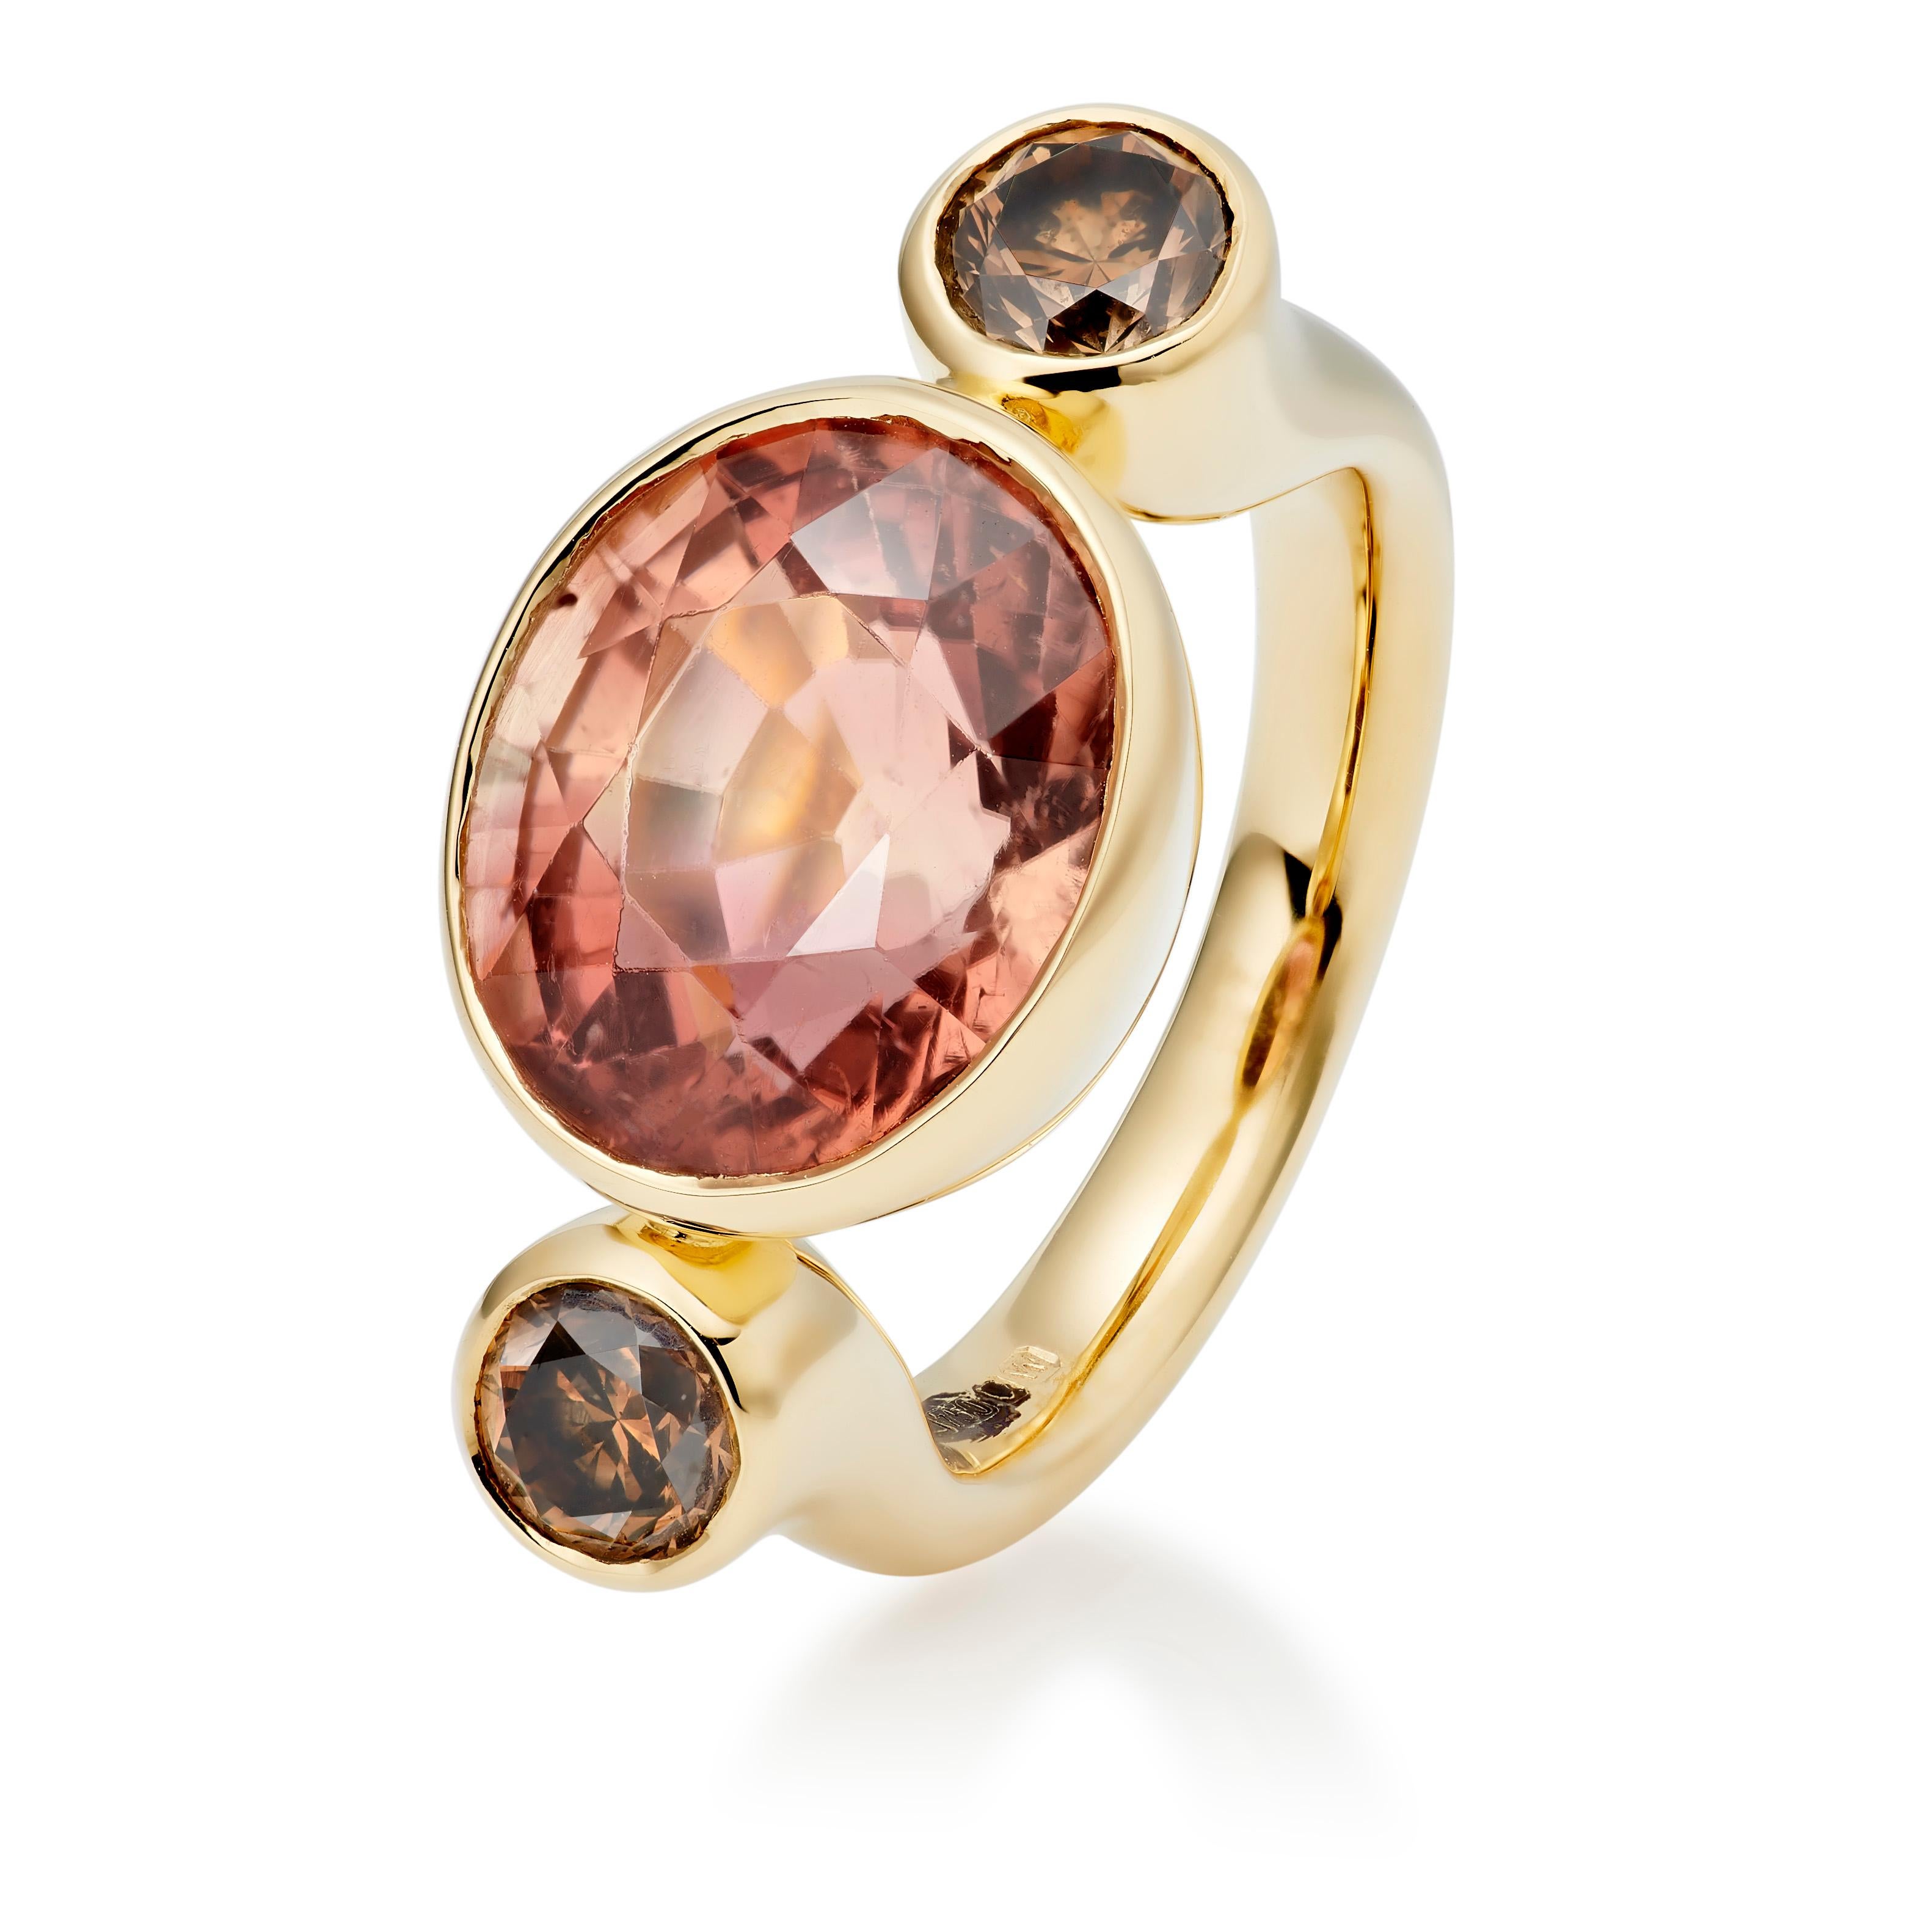 The Bon Bon is one of Lilly Hastedt's signature rings. The design on this ring follows the roundness of the gemstones.  The central Apricot Tourmaline has an oval faceted cut and is paired with sparkling round chocolate diamonds. The tones are warm